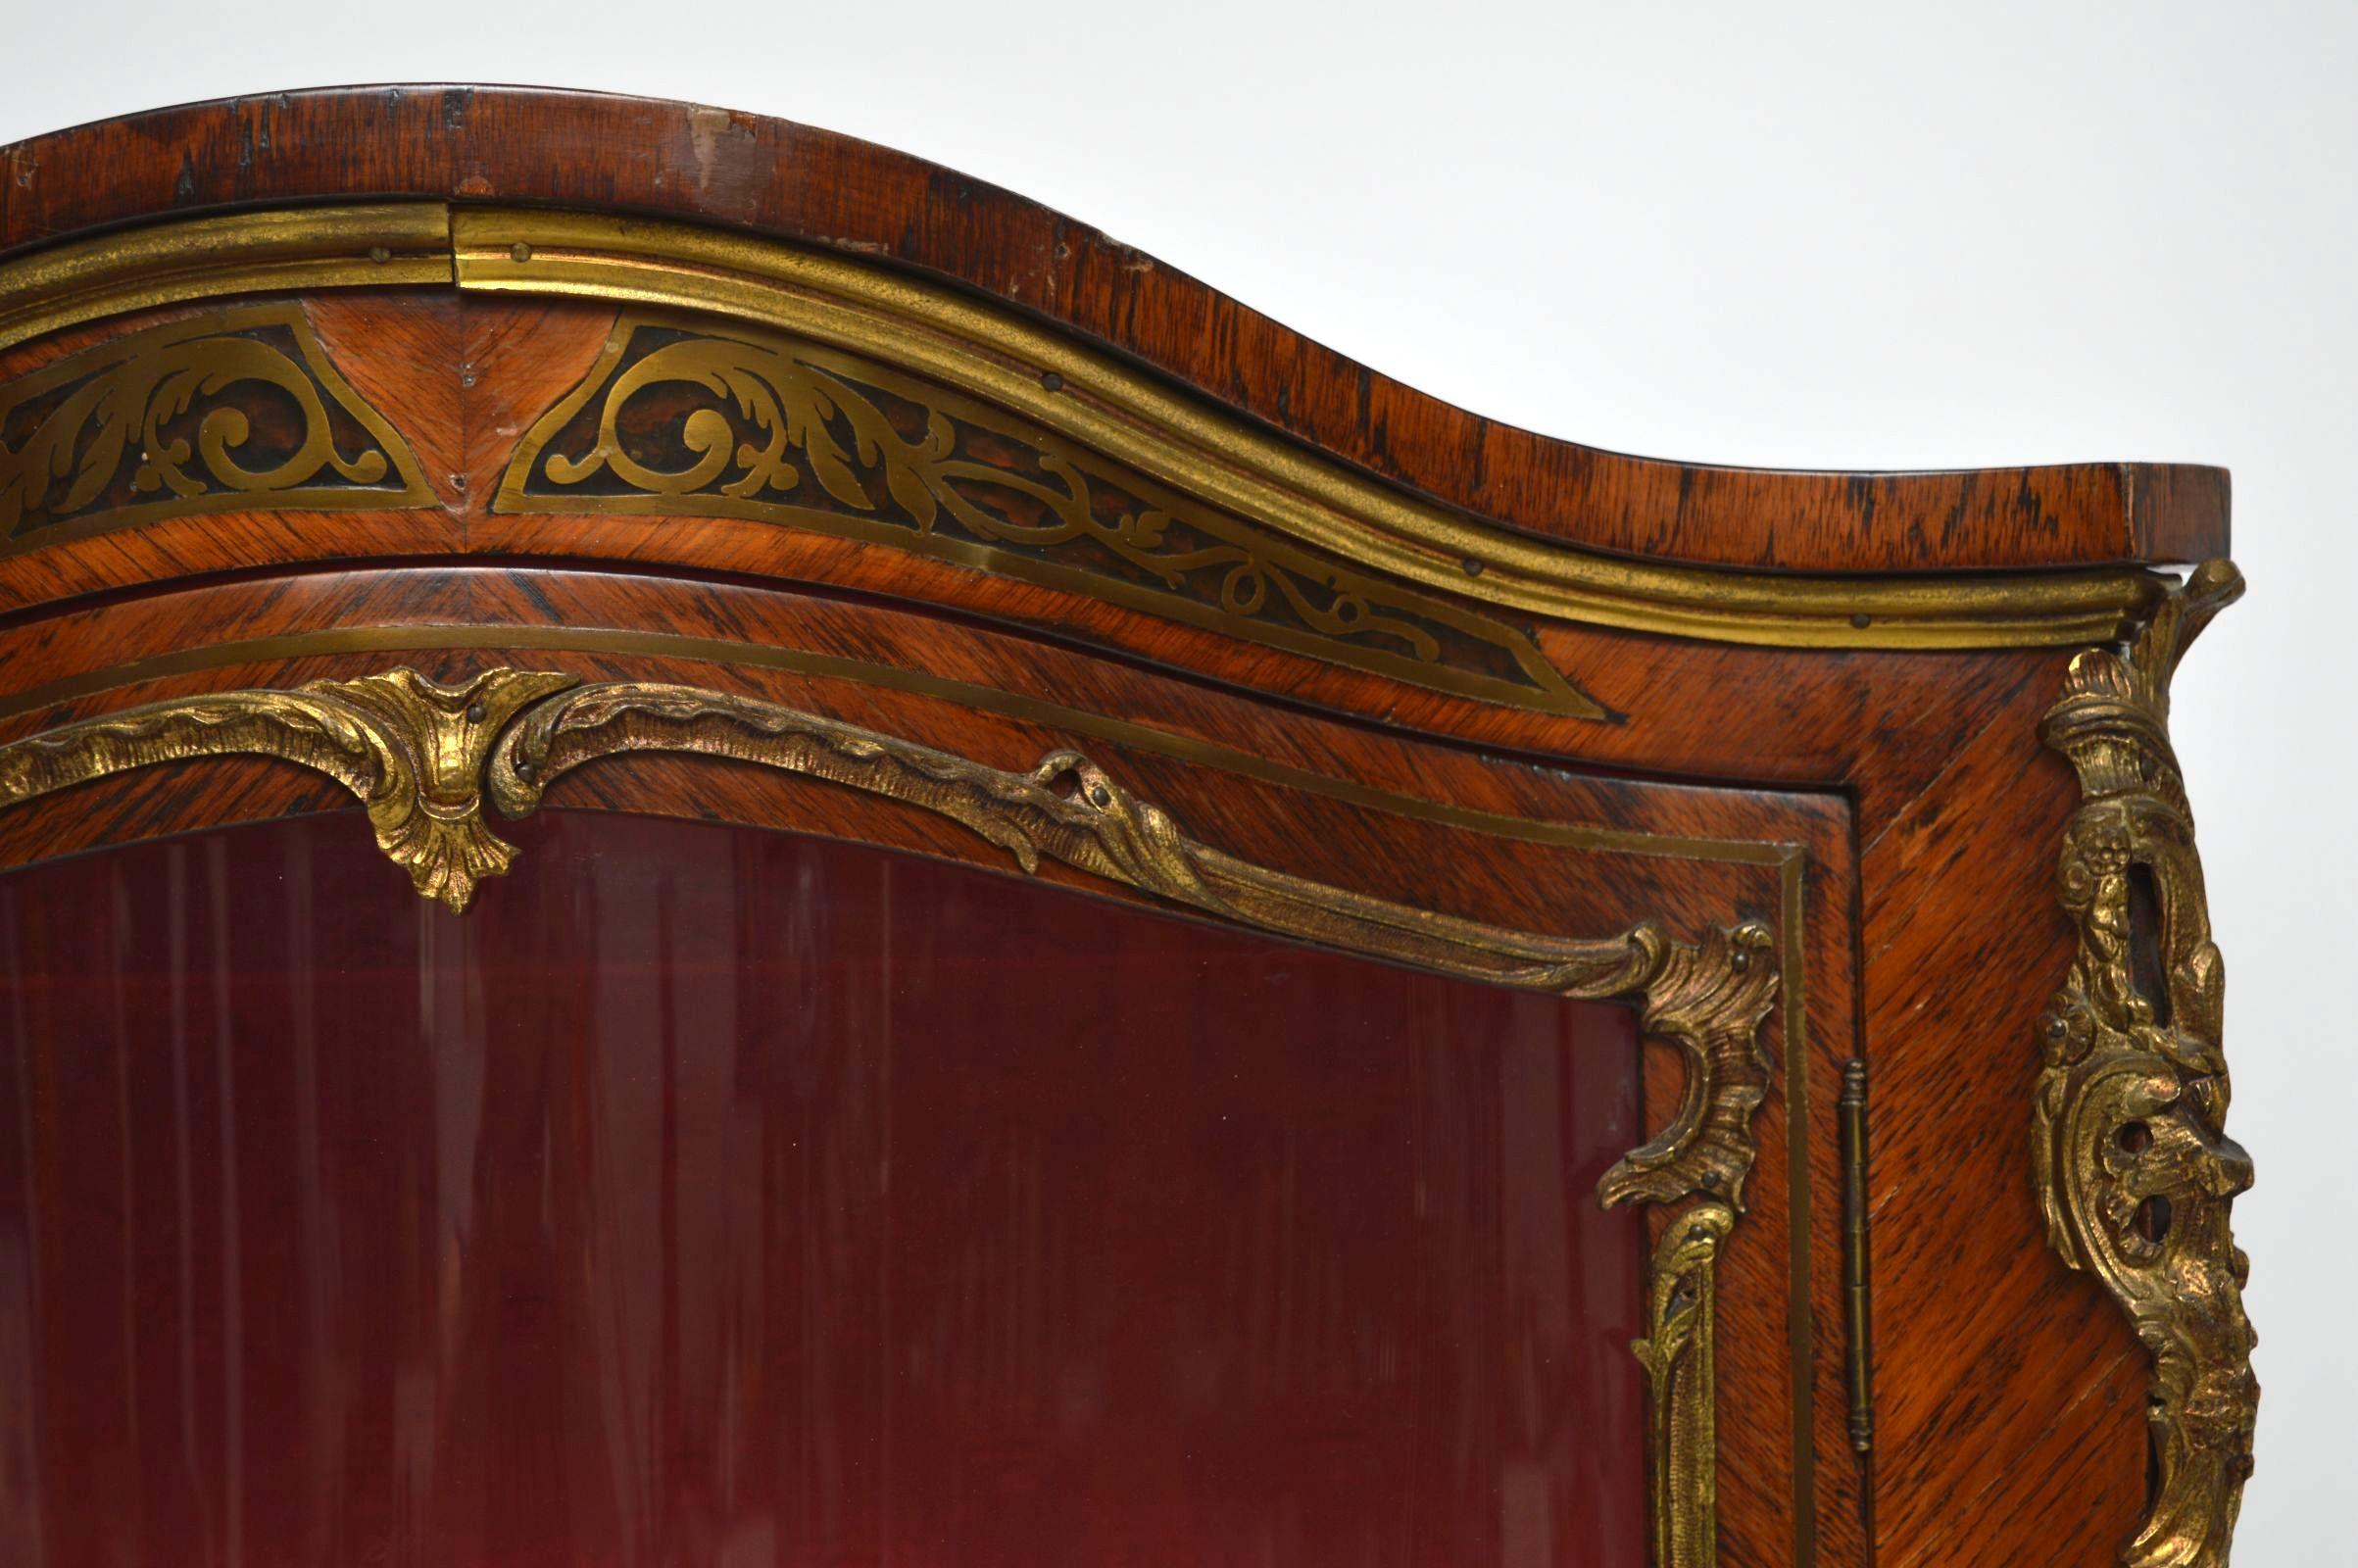 Kingwood Antique French Ormolu Mounted Display Cabinet